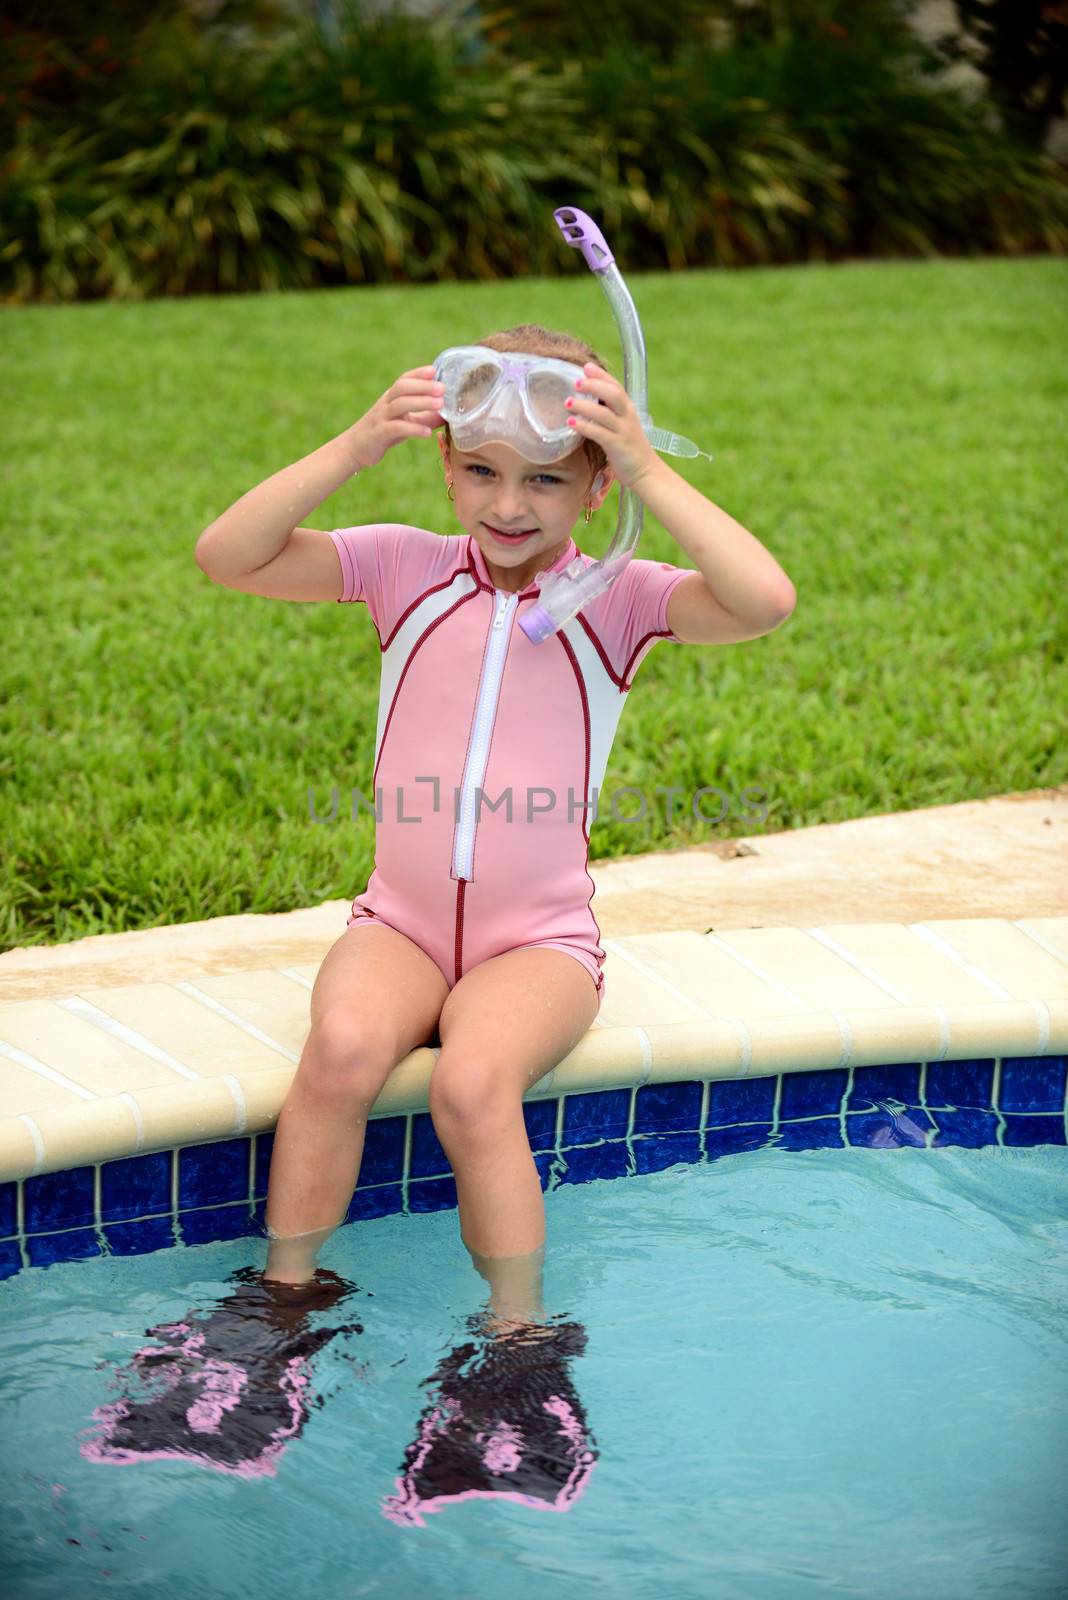 young child and pool by ftlaudgirl